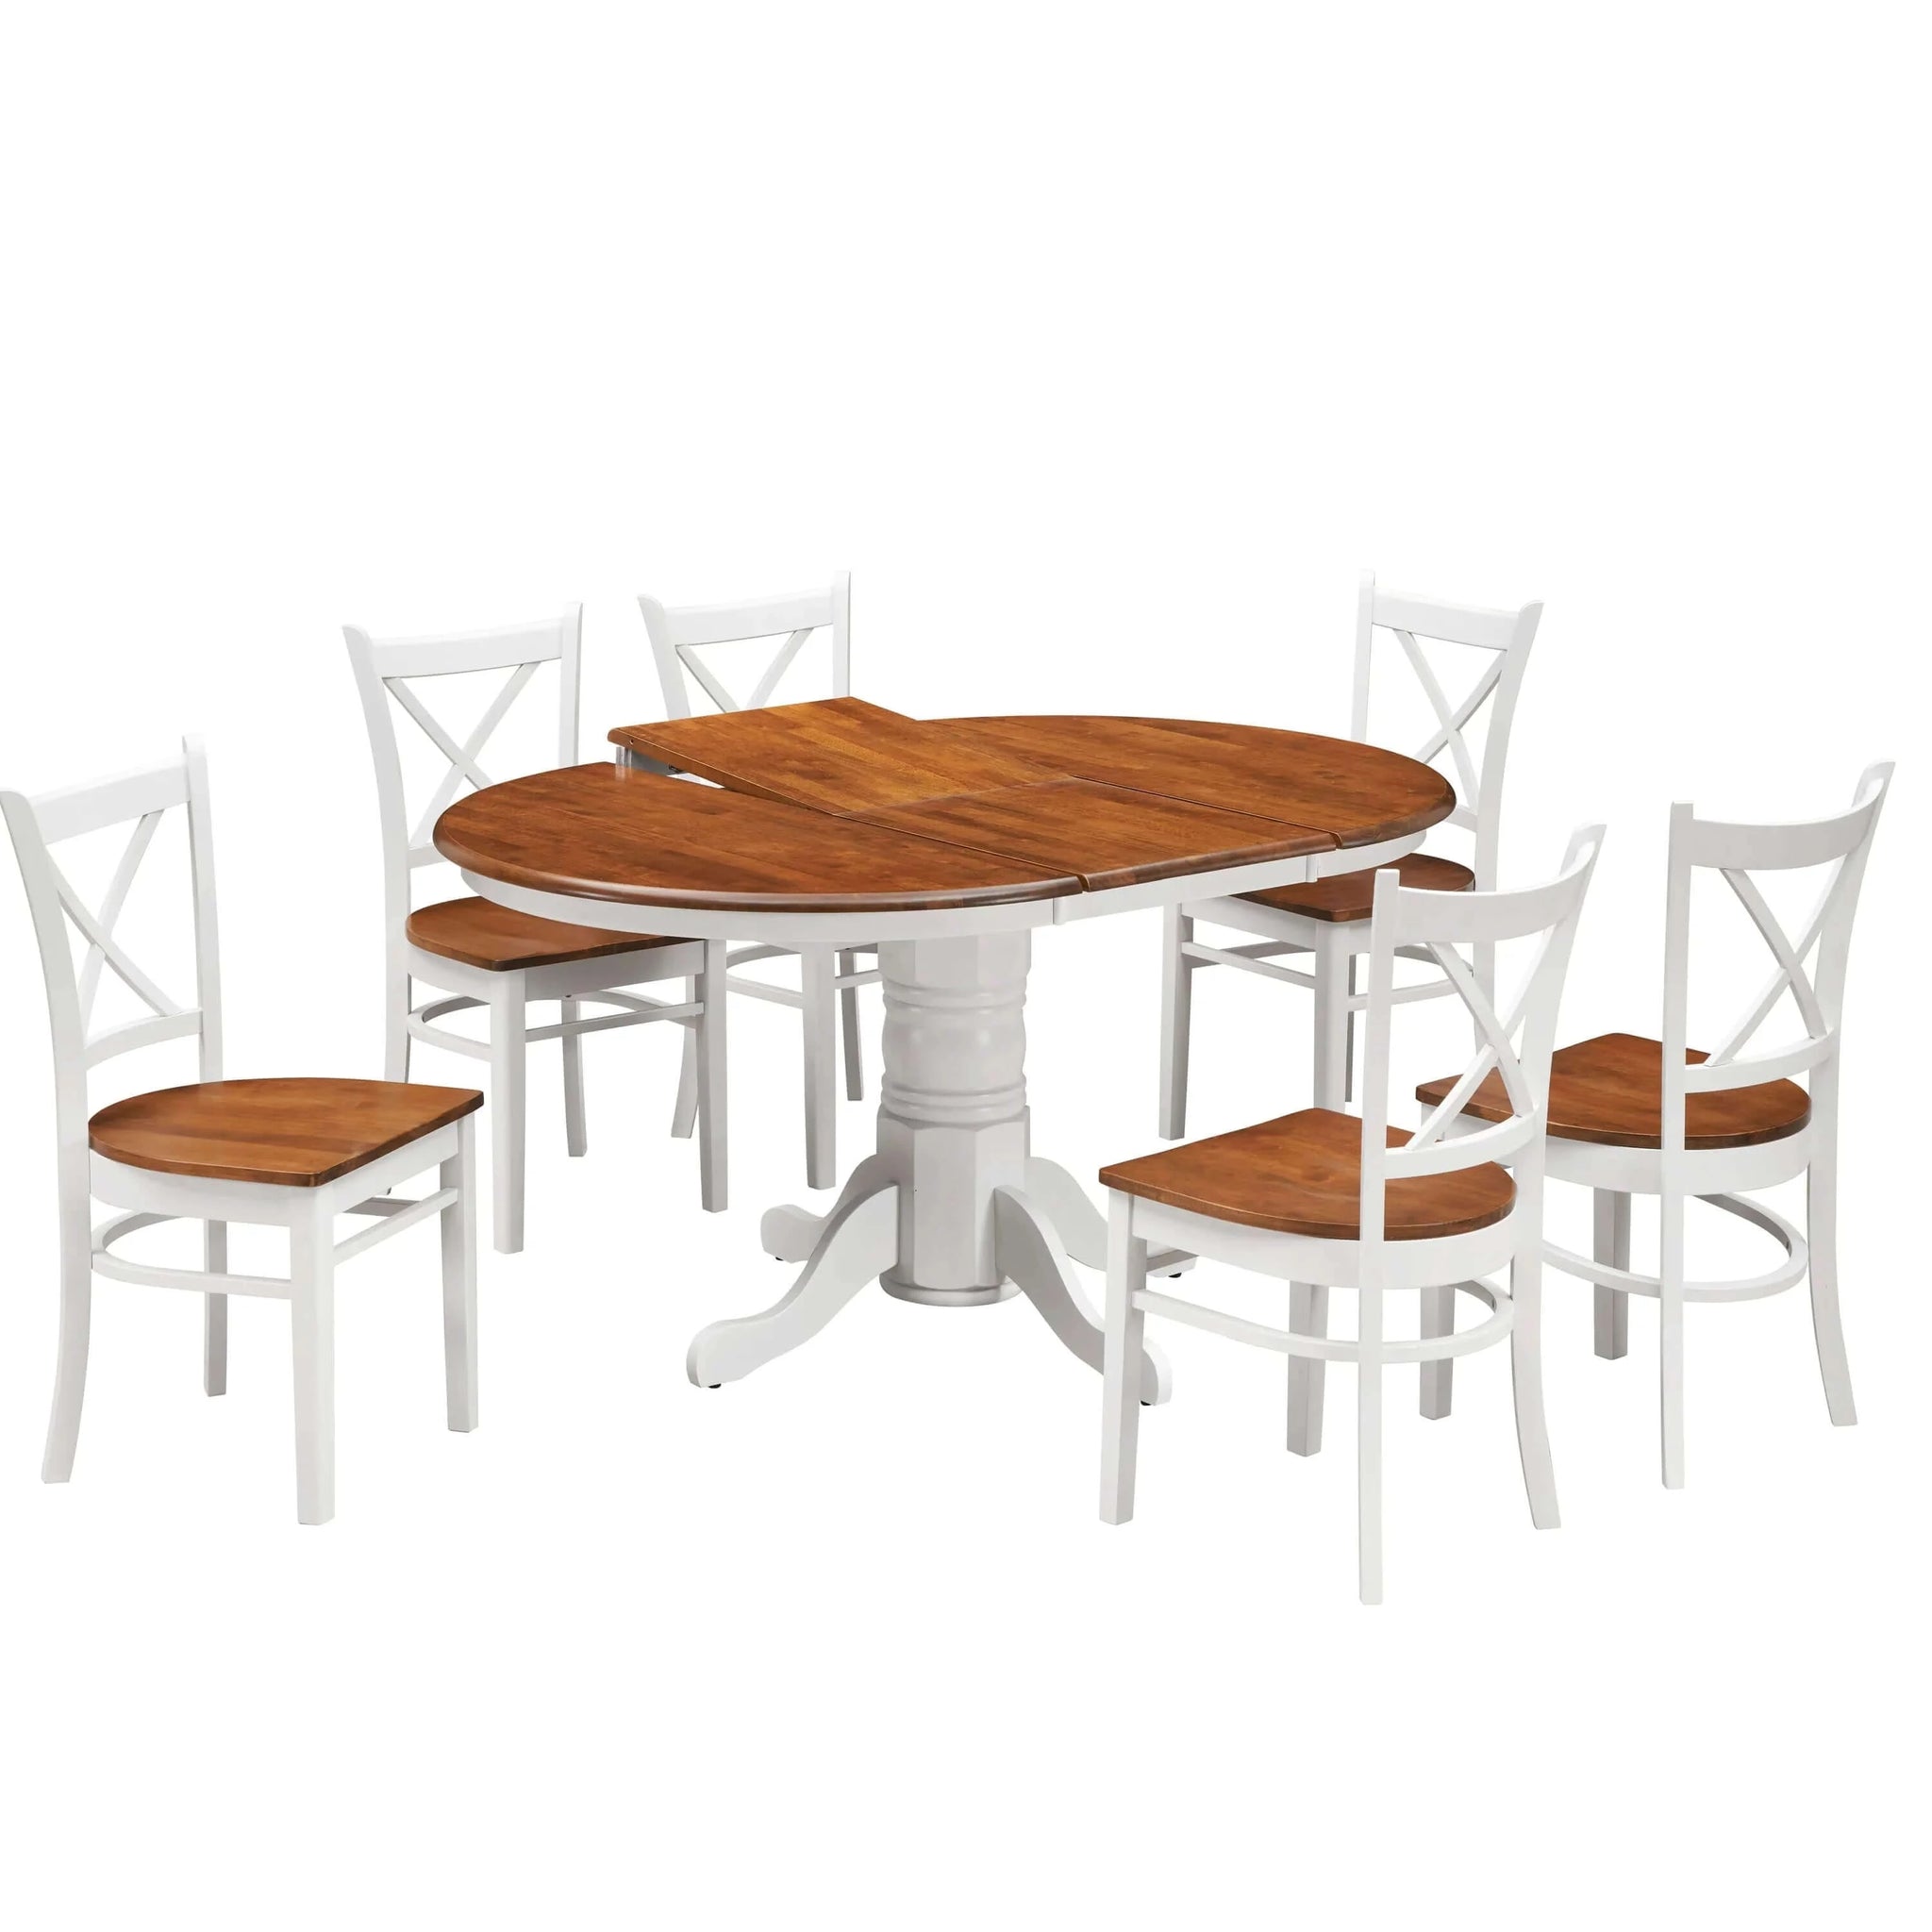 Buy lupin 7pc dining set 150cm extendable pedestral table 4 timber chair - white oak - upinteriors-Upinteriors